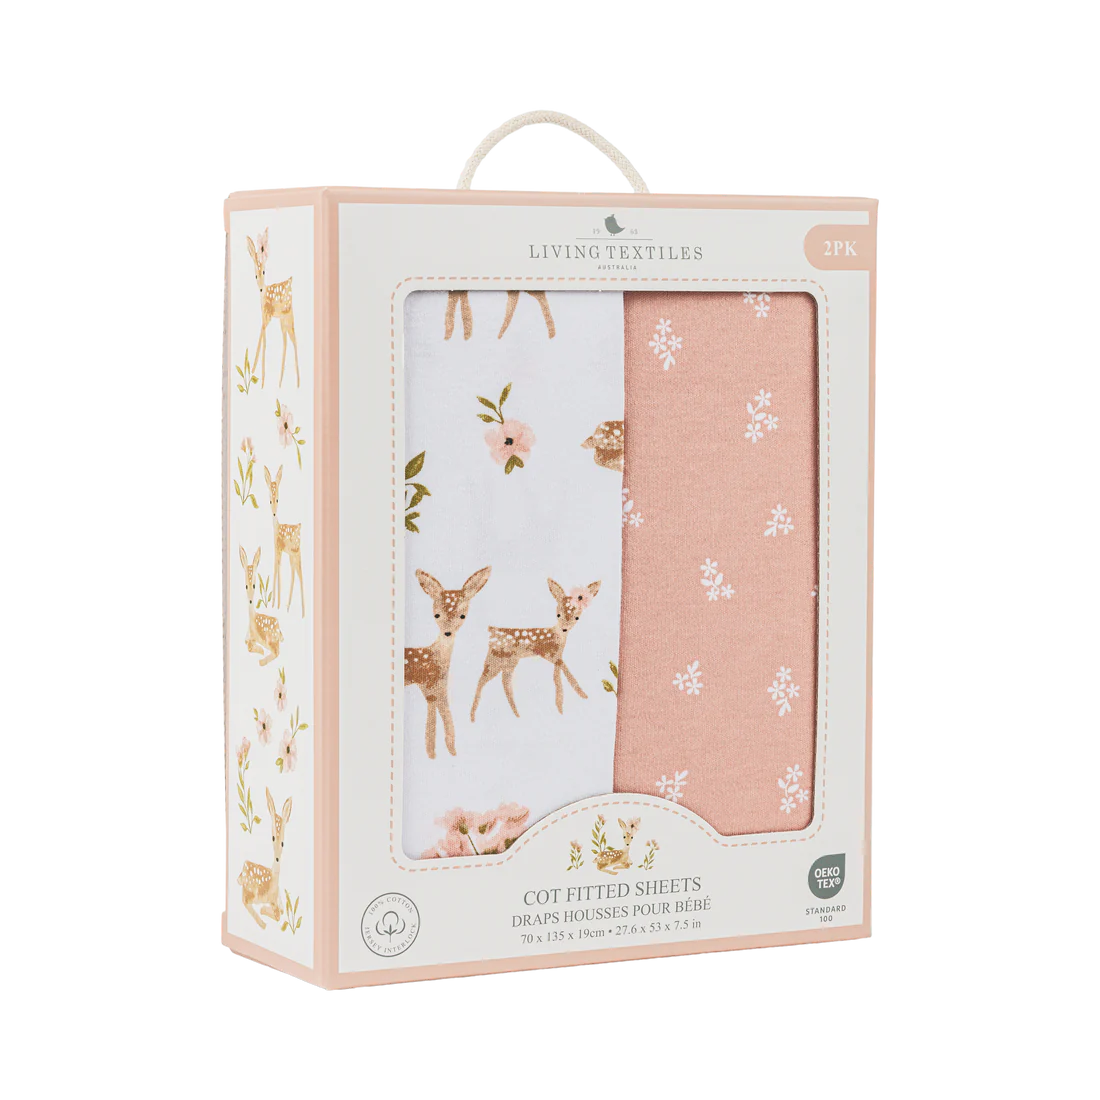 Living Textiles 2 pk Cot Fitted Sheets - Sophia's Garden